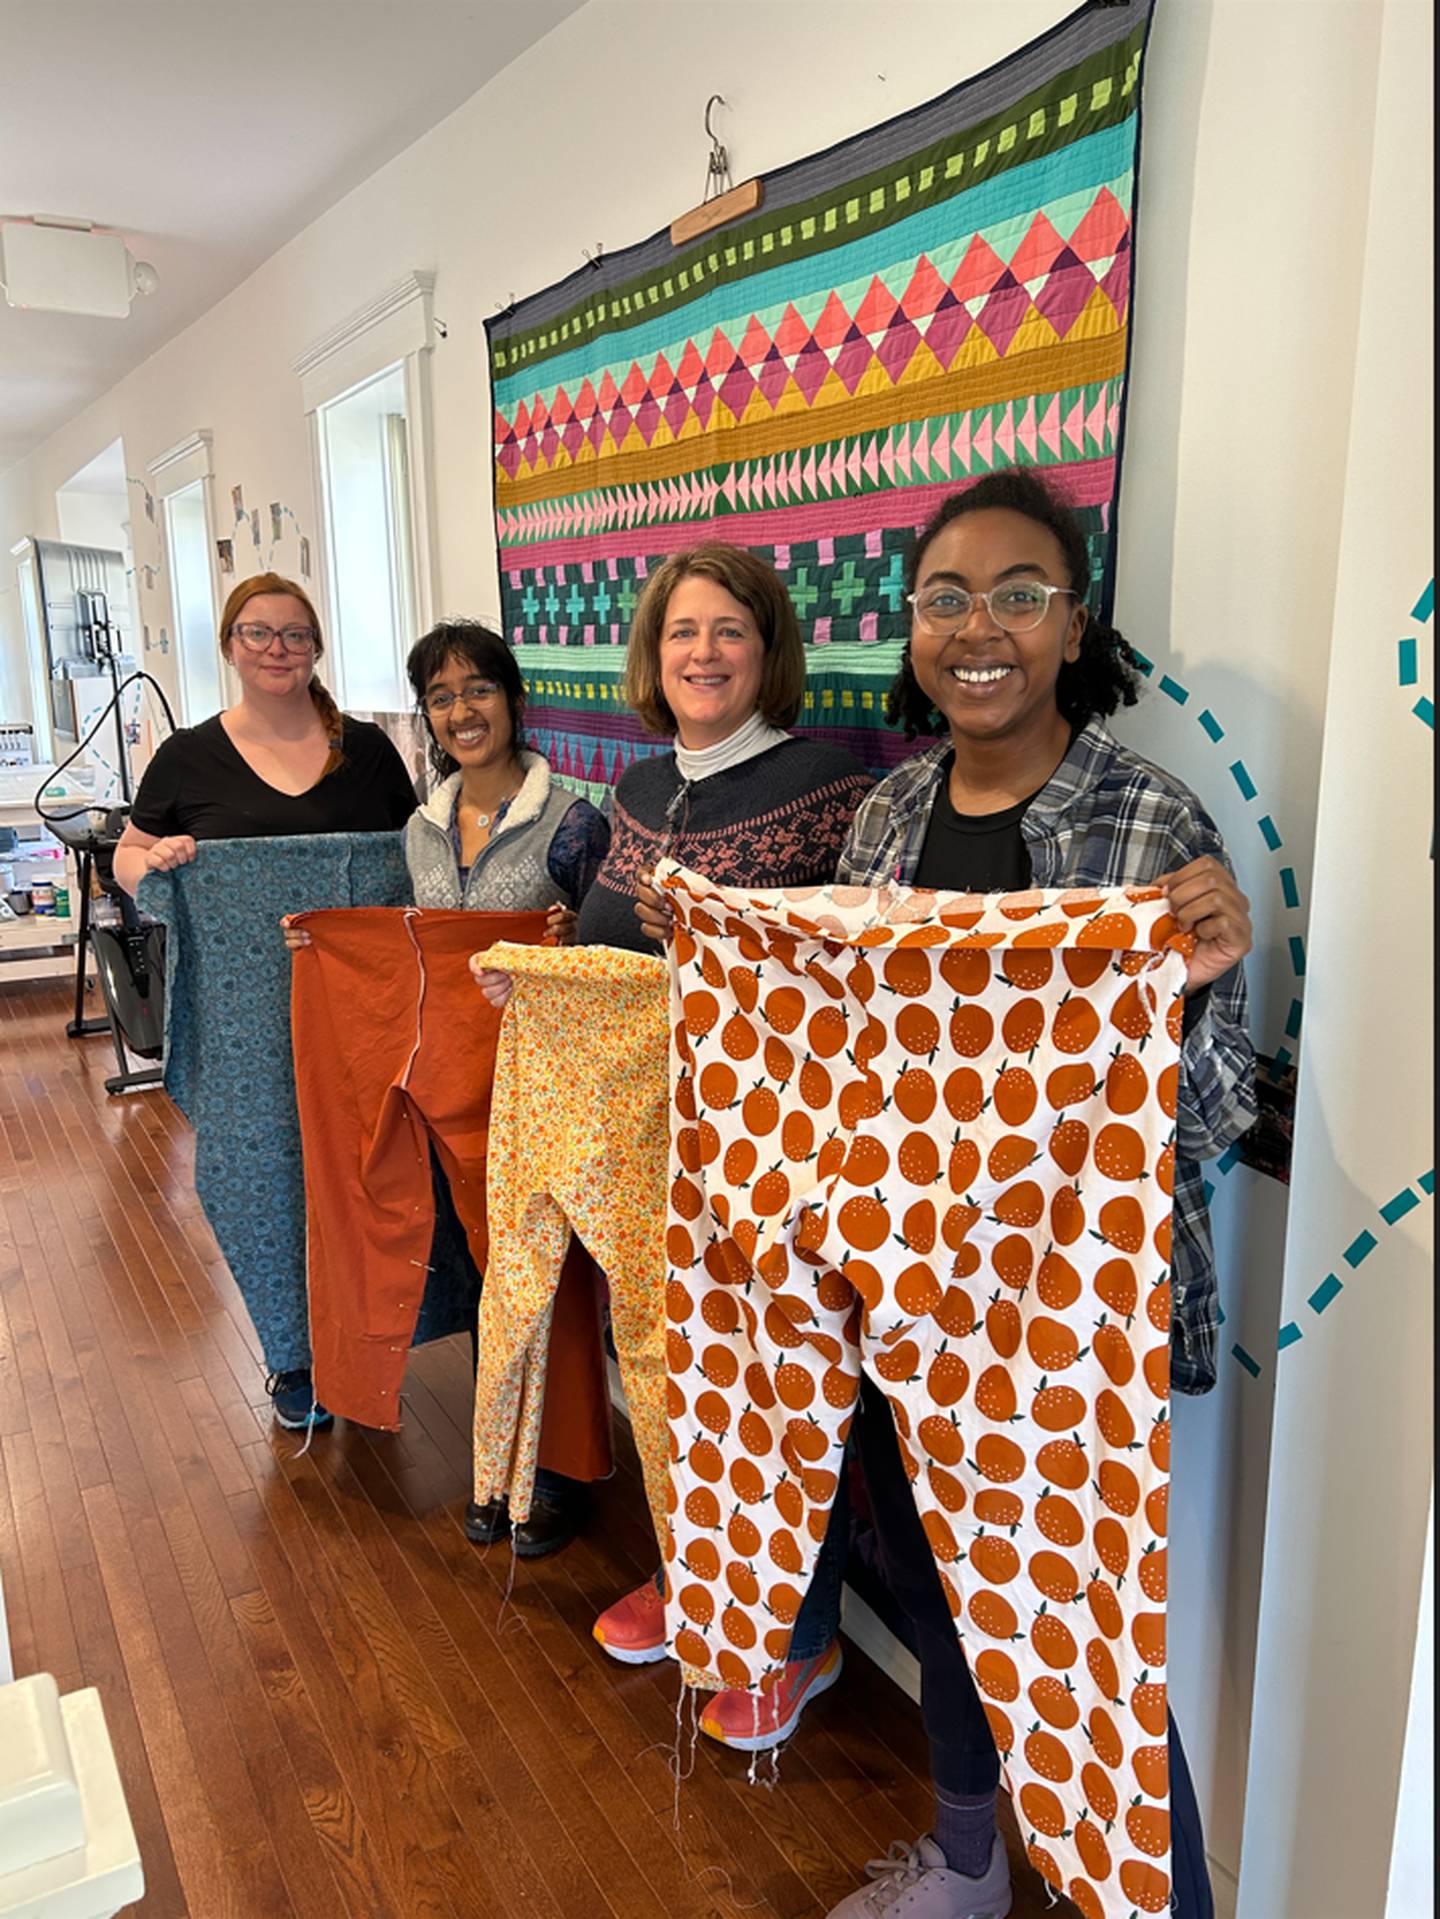 At the end of the Sew Some Garments class, students are holding up their nearly finished trousers. 
From left to right, Cecilia, Neha, Lisa and Imani.